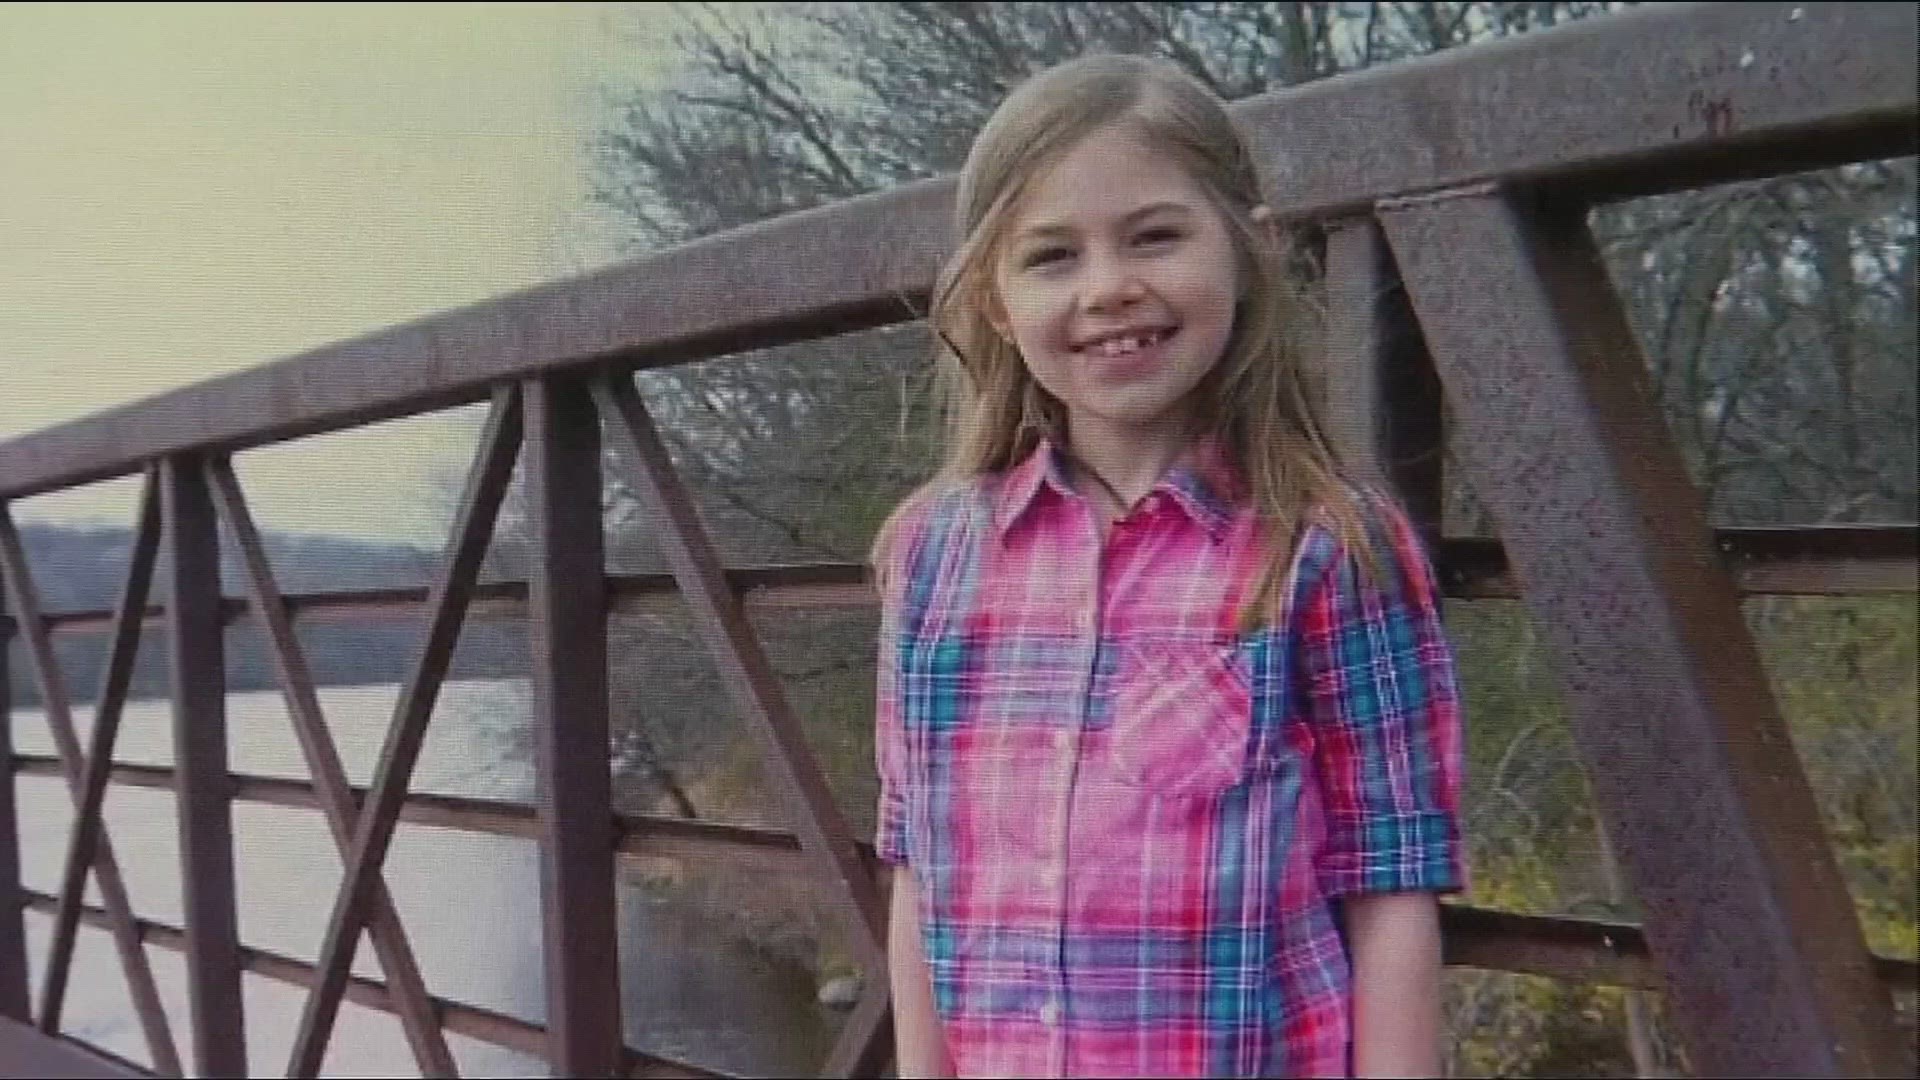 Kayla Unbehaun was nine years old when she was abducted by her mother and the two hadn't been seen since.